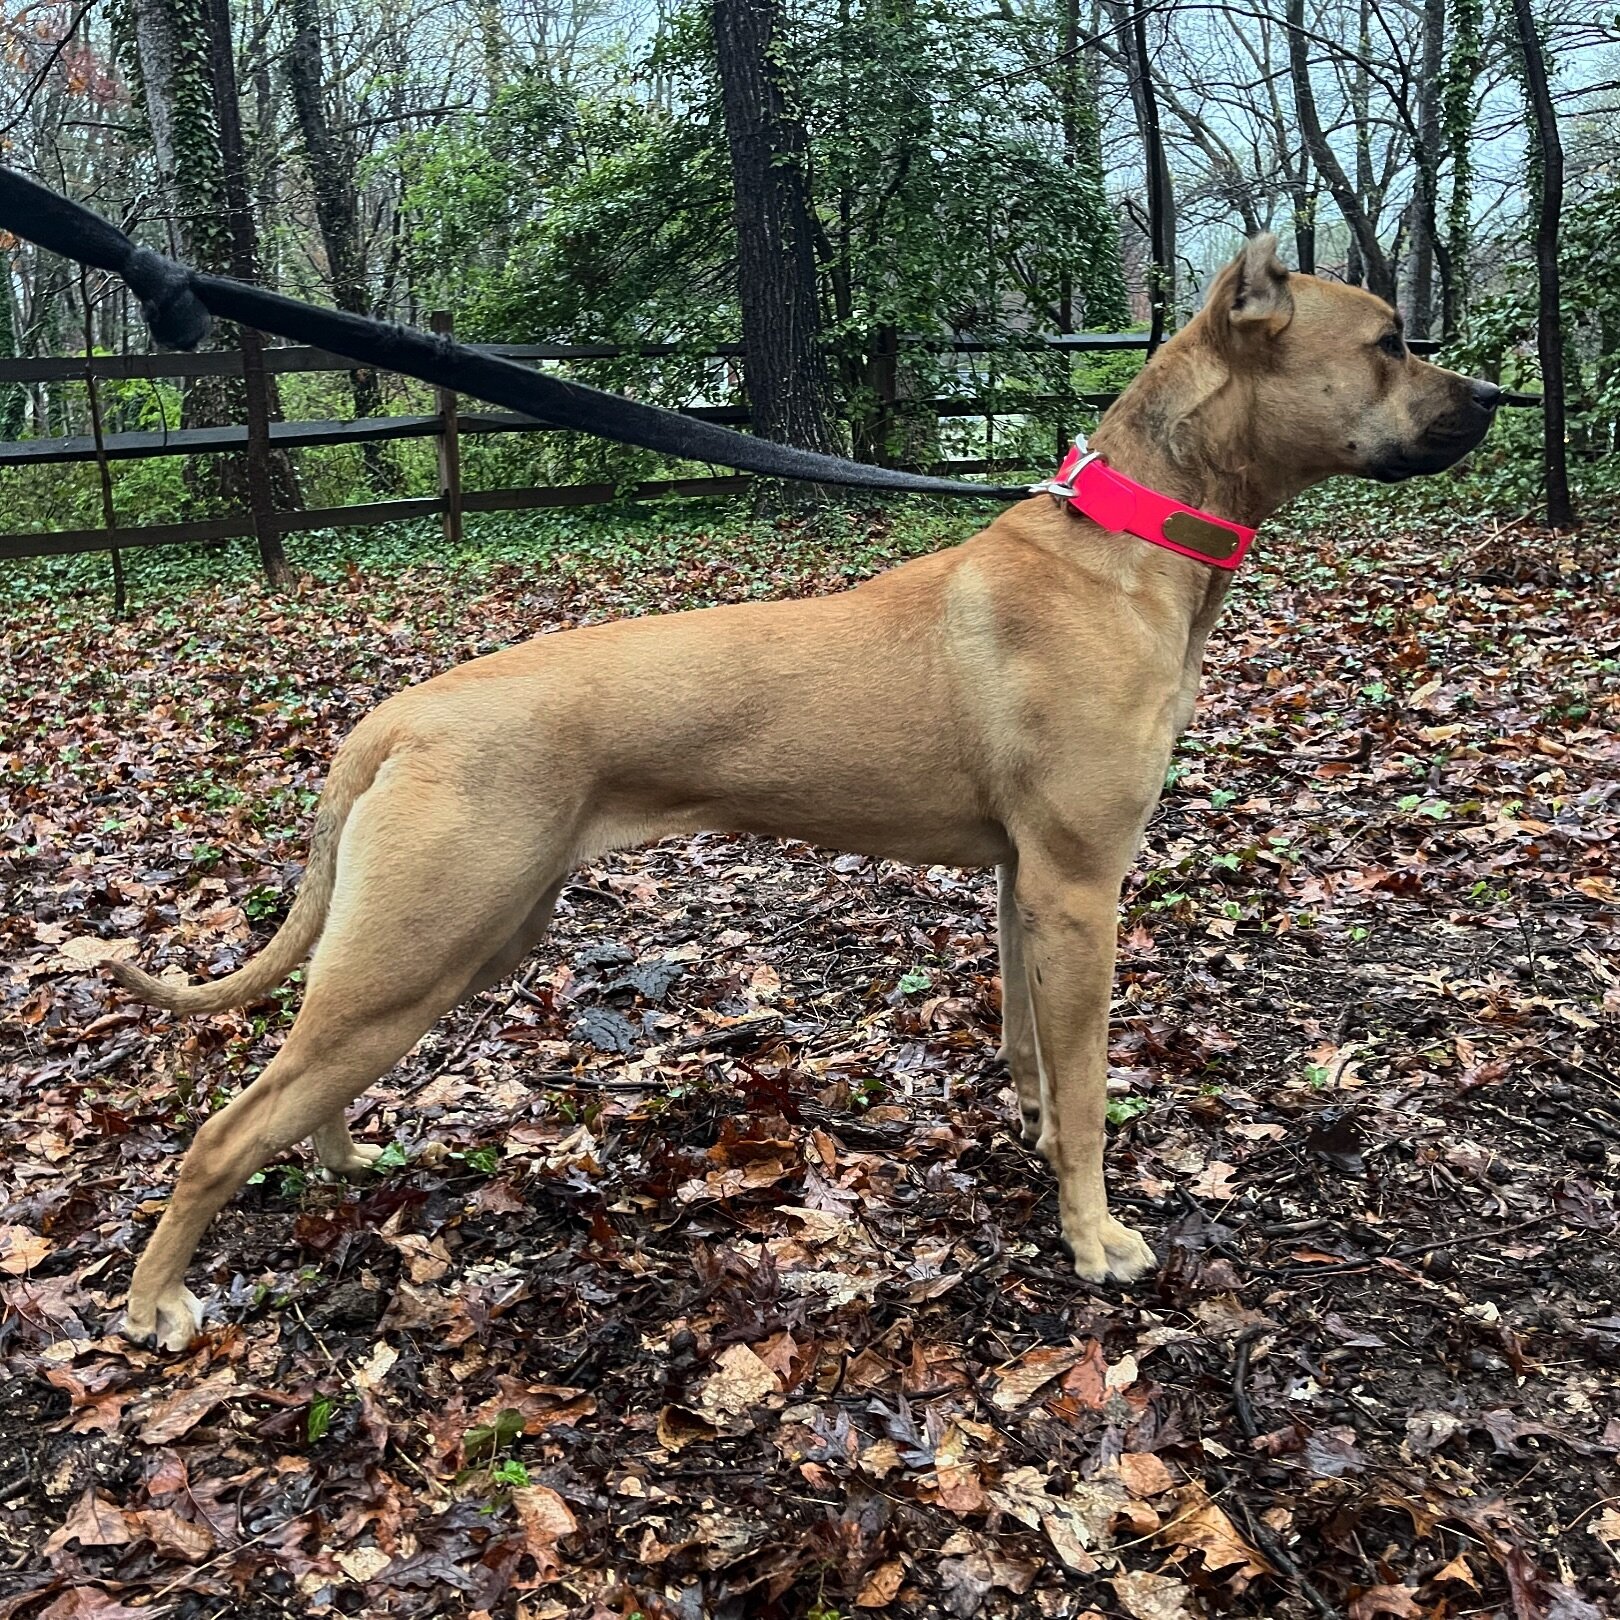 Savant&rsquo;s Uzi - 10mo. 
Nero x Amina
.
She&rsquo;s shown a lot of progress the past two months. Routine trips to the woods at night have tickled her taste for fur. She&rsquo;s actively seeking - using all her senses - balanced between sight and s